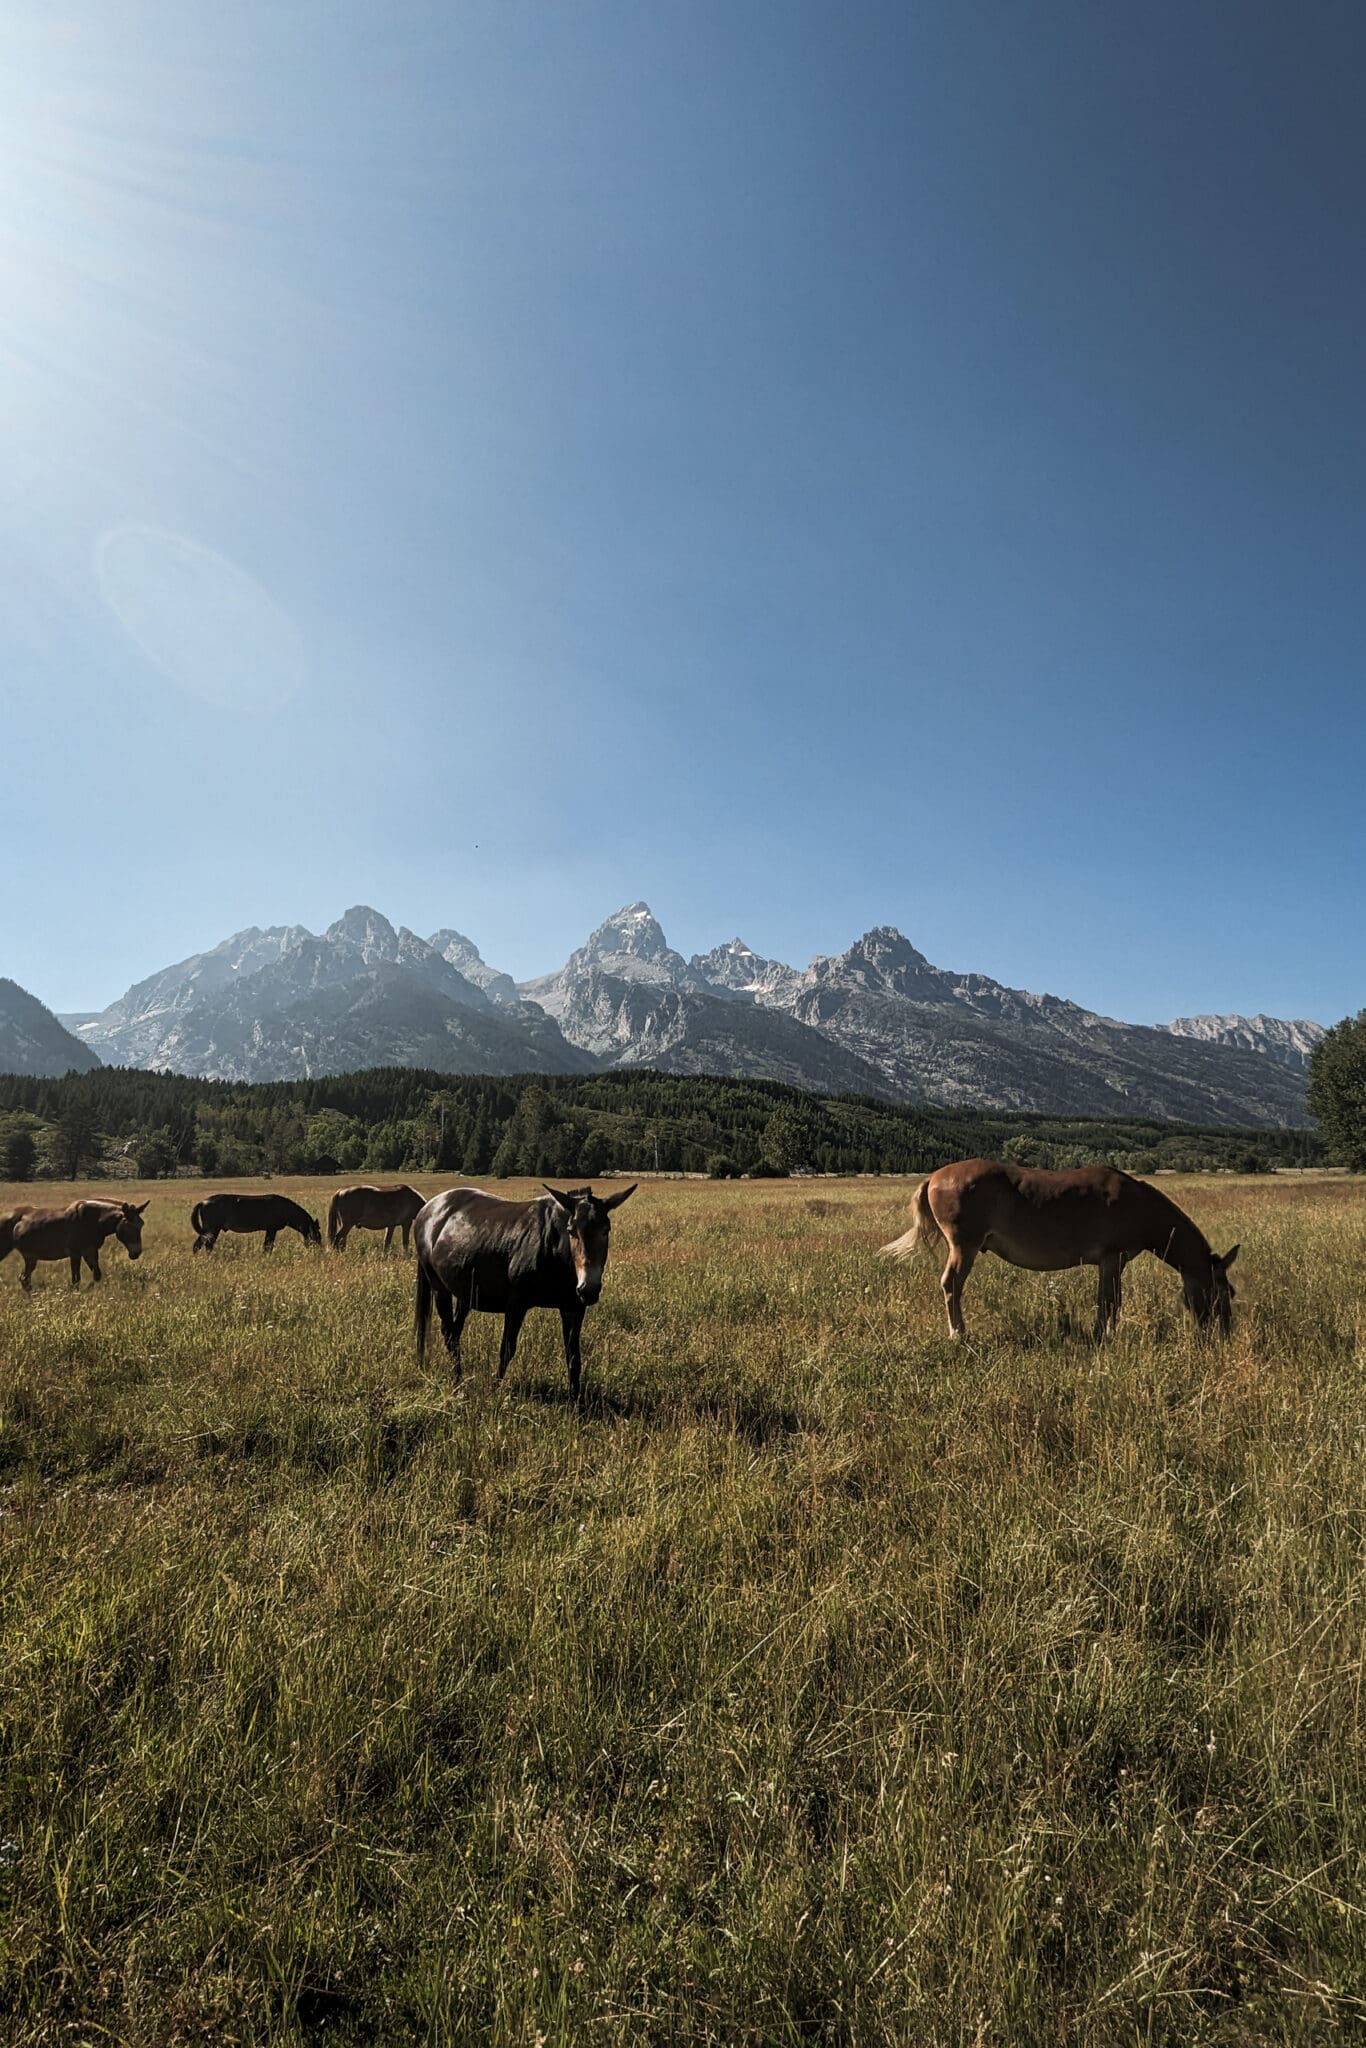 Horses in front of mountains in Grand Teton National Park